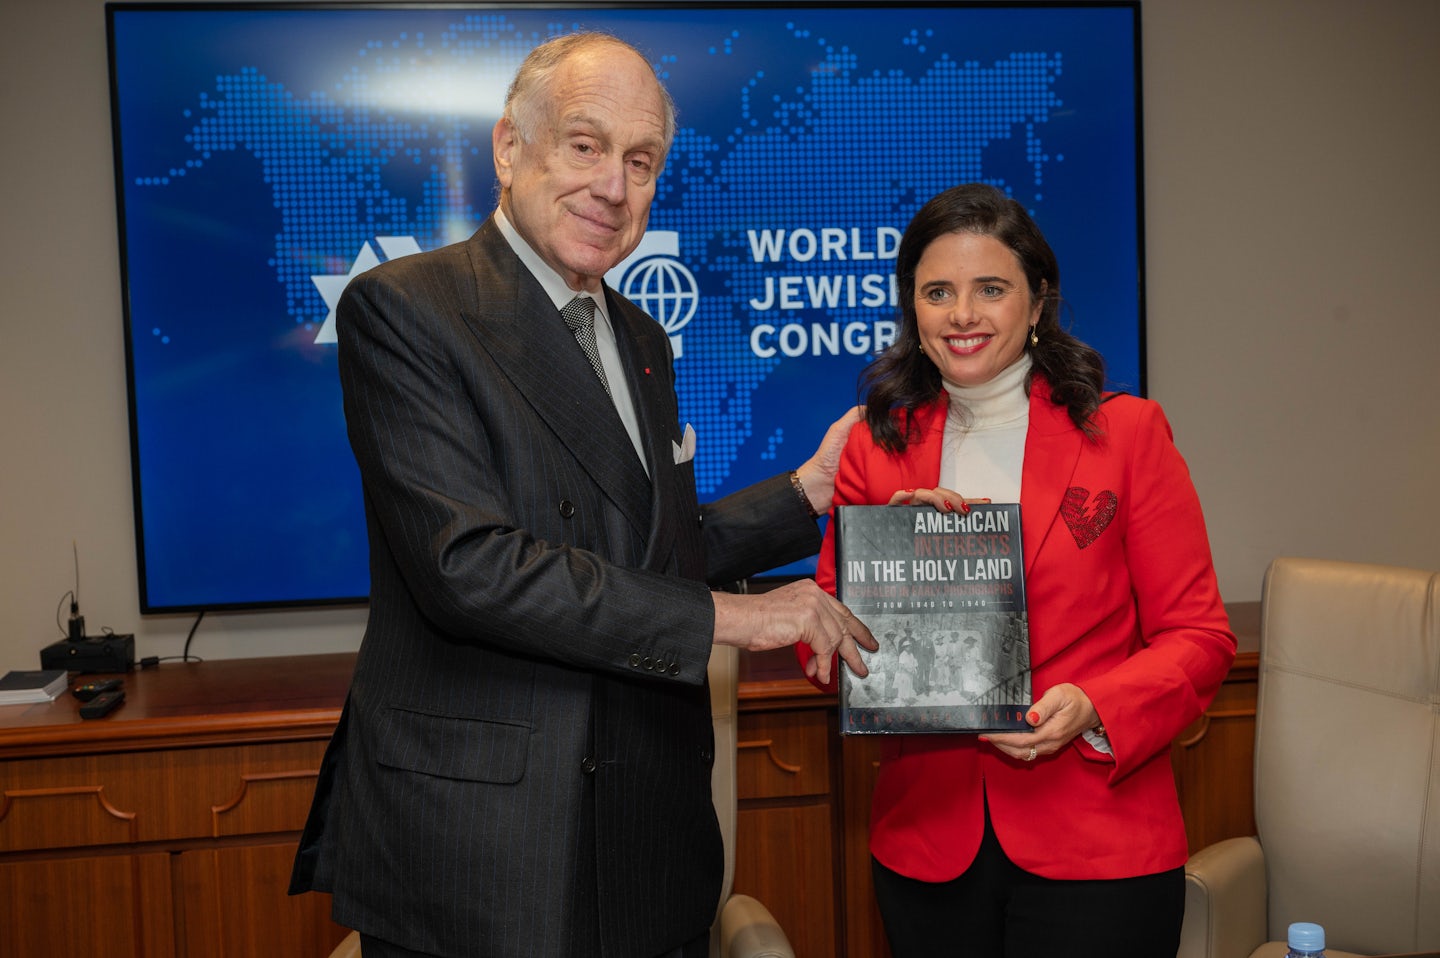 WJC President Ronald S. Lauder presents Israeli Minister of the Interior Ayelet Shaked with American Interests in the Holy Land Revealed in Early Photograph on 15 November 2021. (c) Shahar Azran / WJC